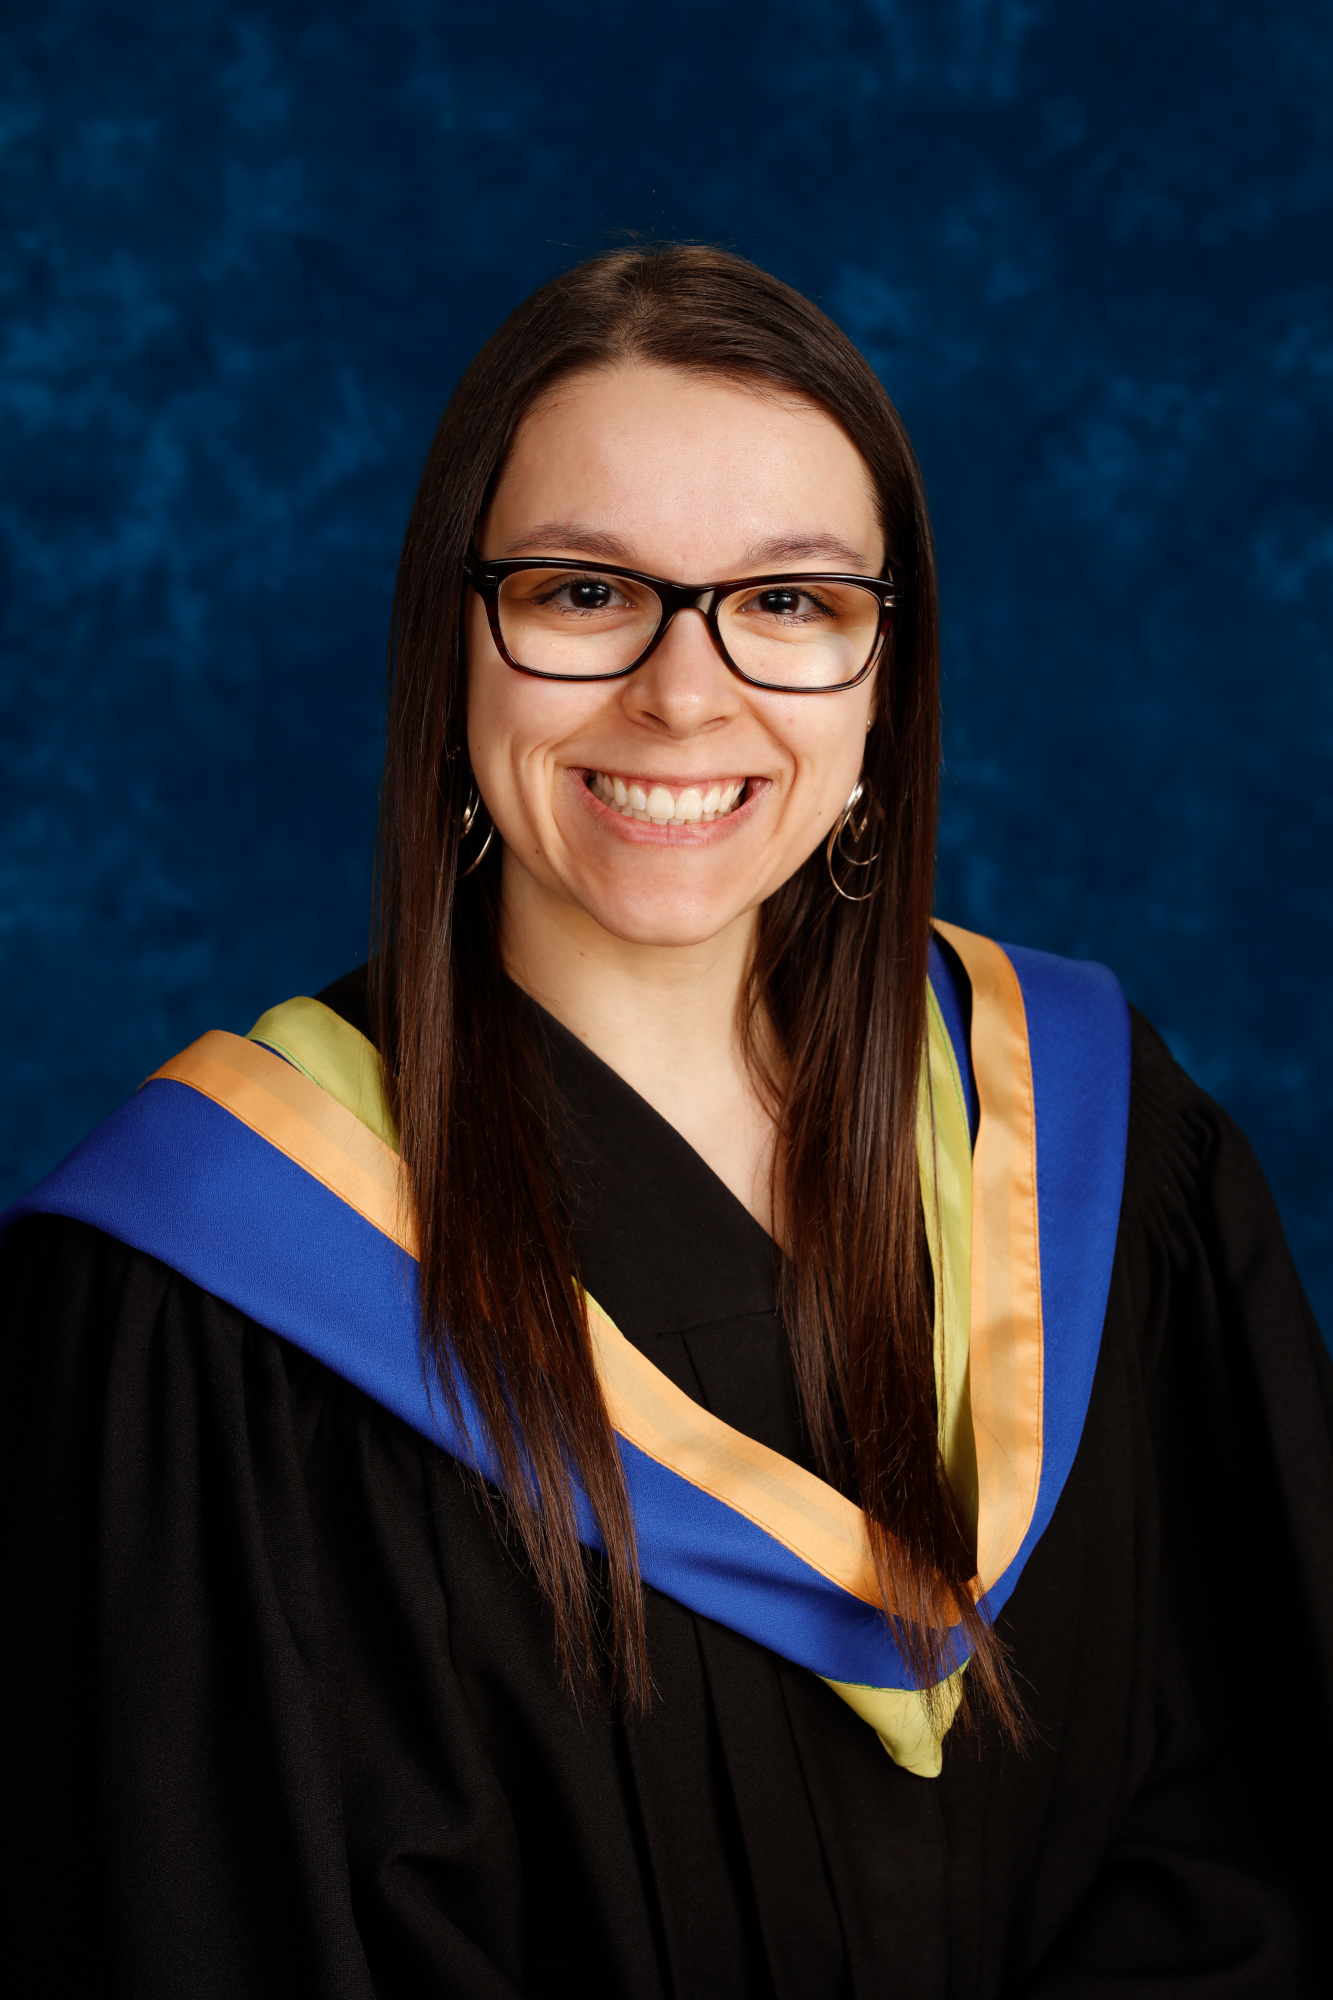 A graduation photo of Danica Frappier. She is smiling and wearing a graduation gown with a stole in blue, yellow and gold accents.